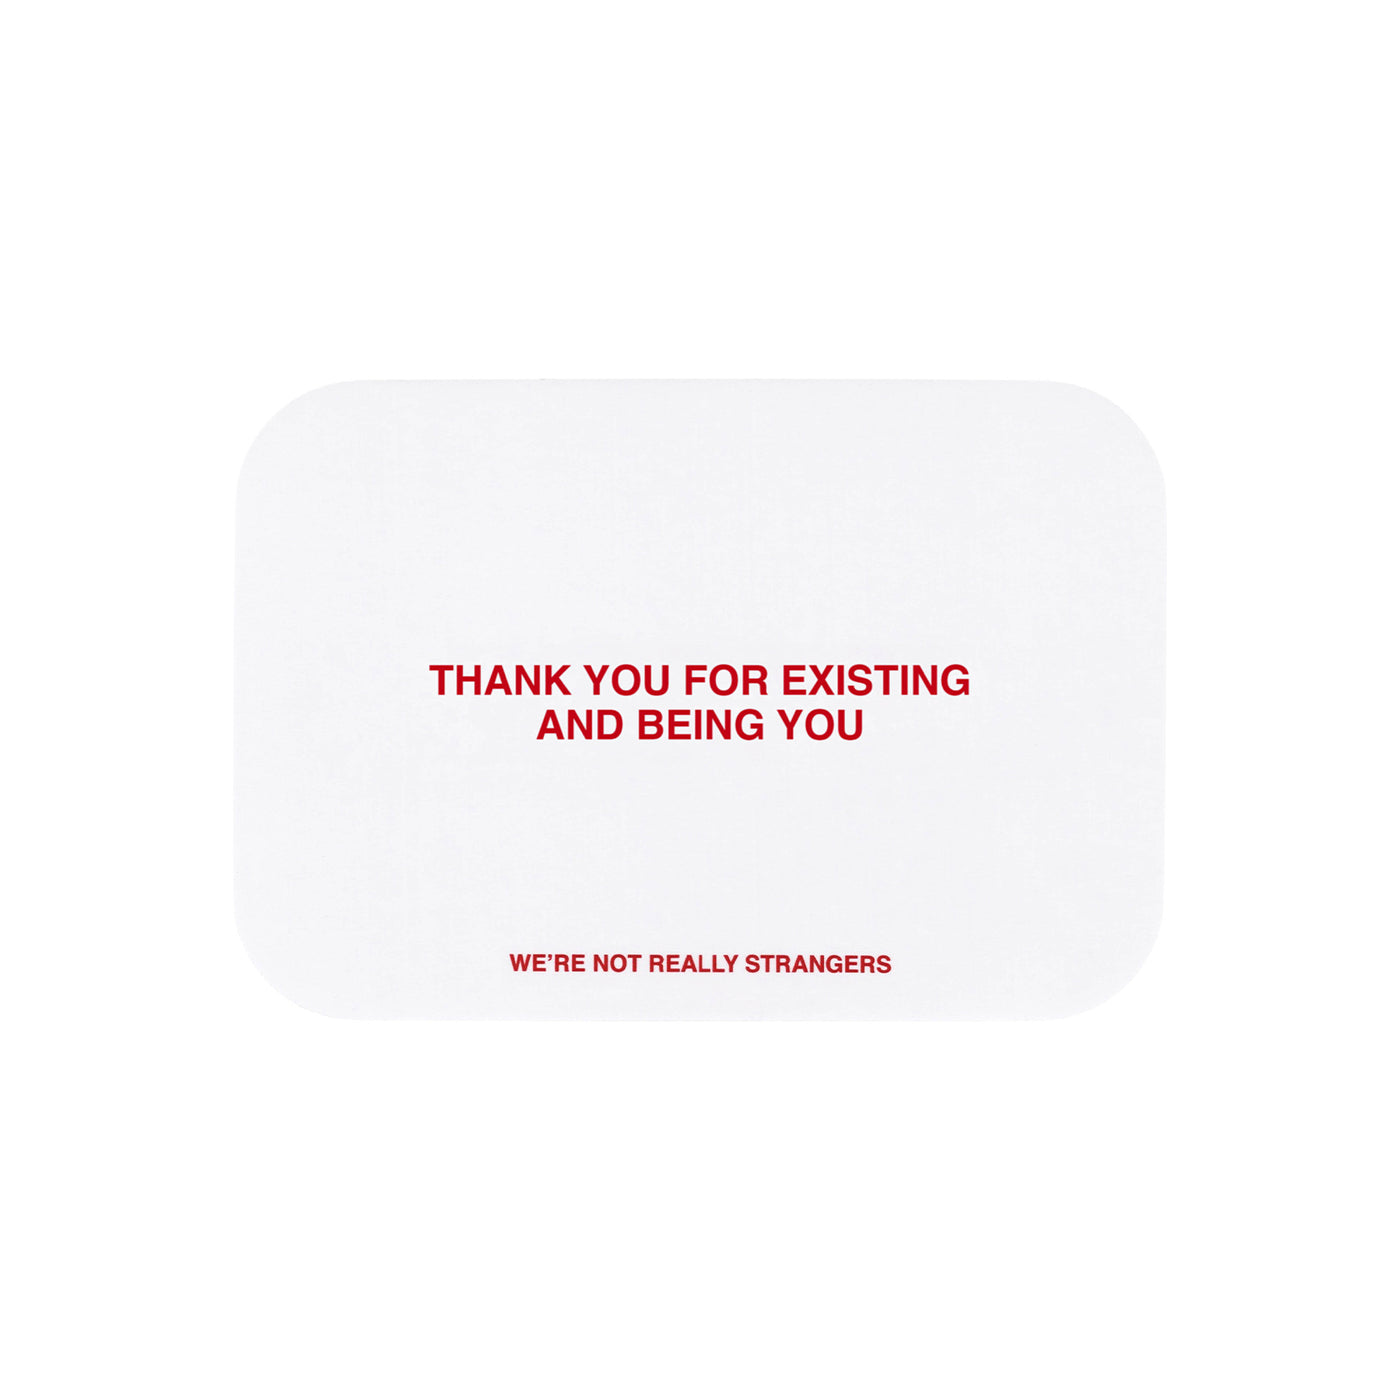 We're Not Really Strangers E-Gift Card. Front facing view of white card option reading "Thank you for existing and being you" in red font.